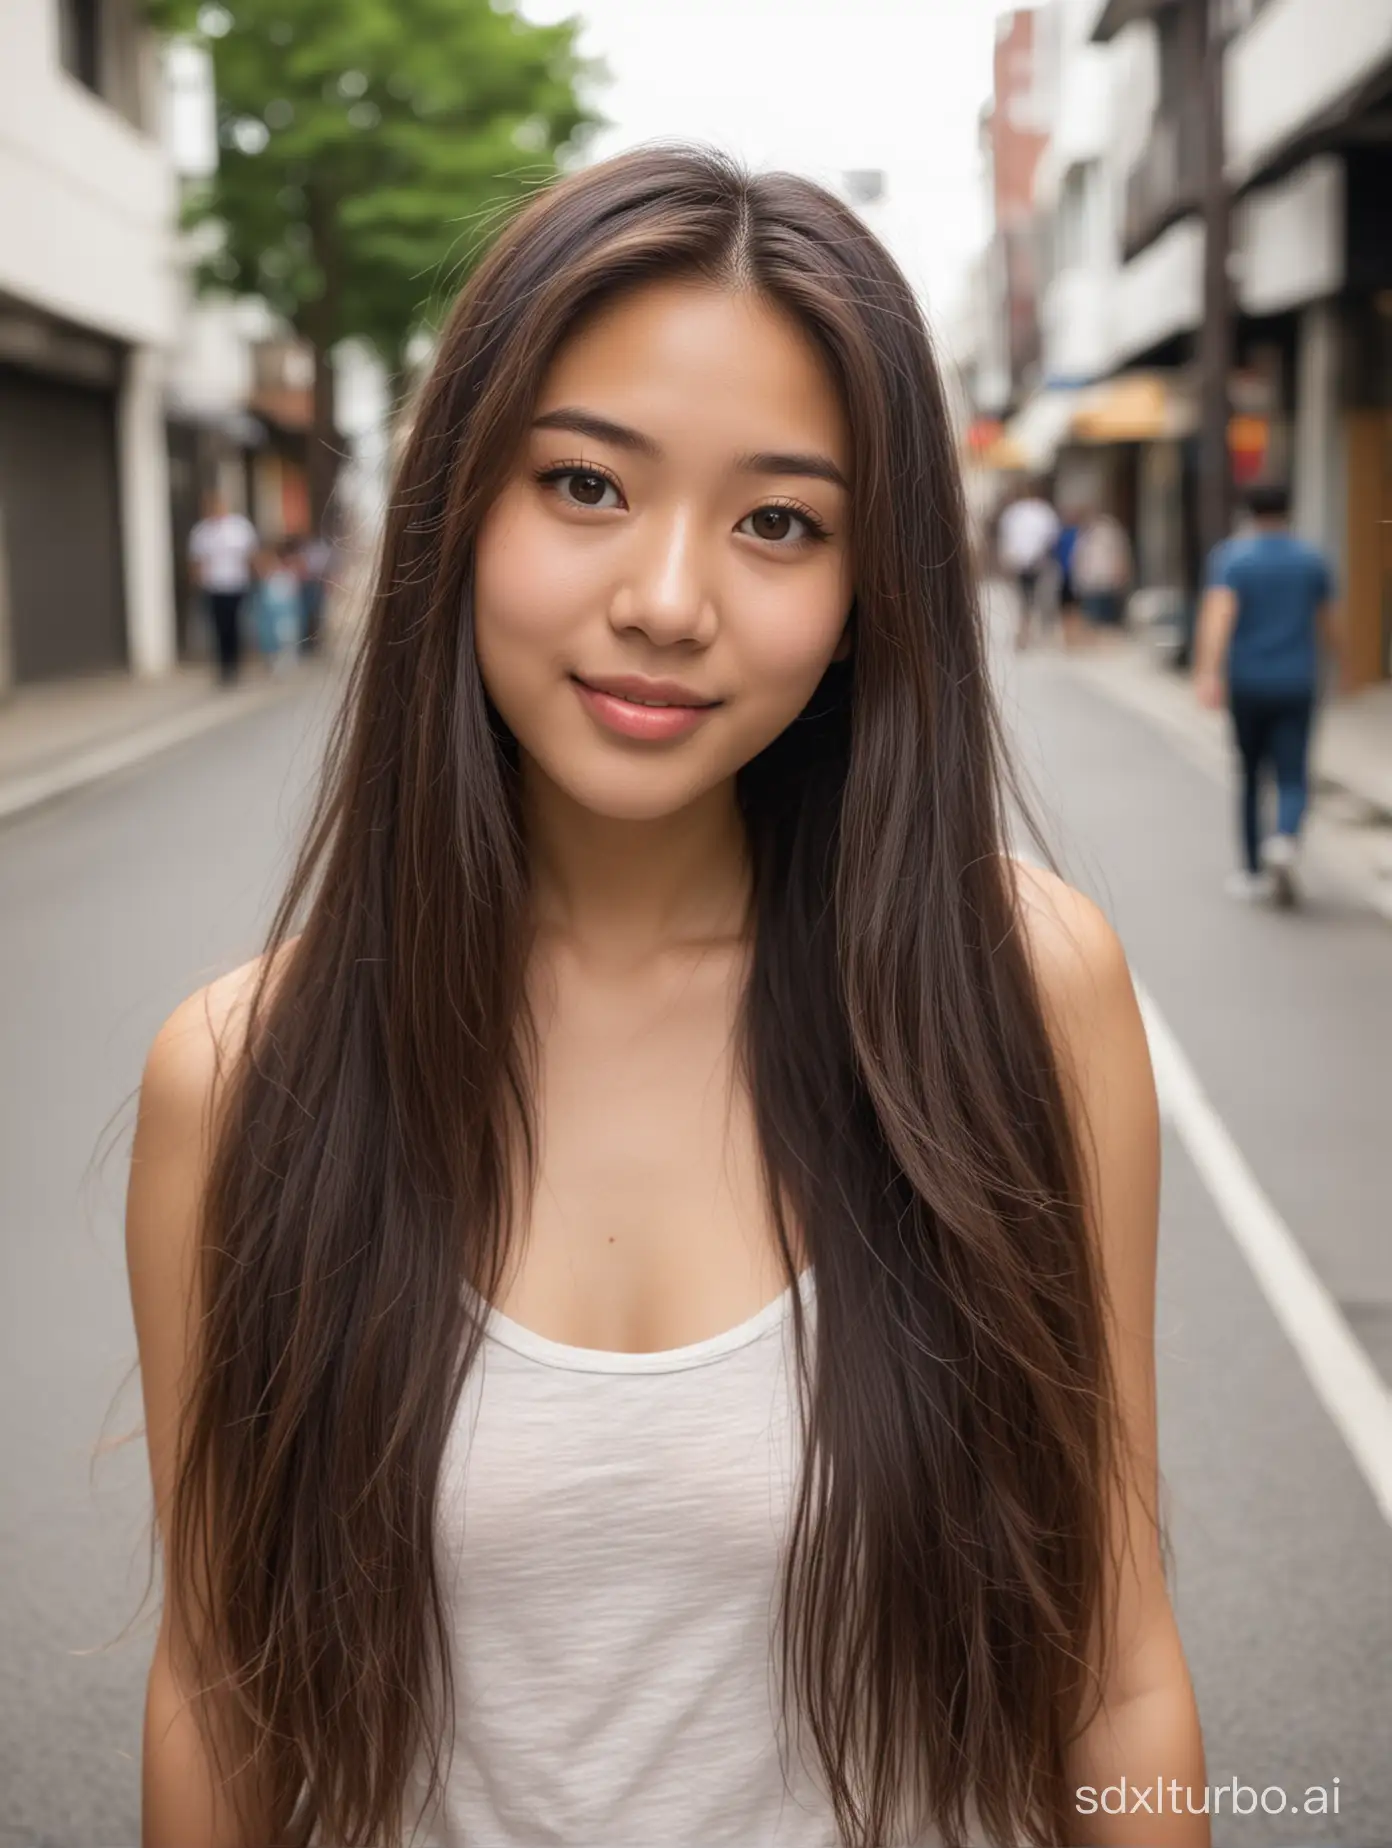 Adorable-ChineseJapanese-Teenage-Girl-with-Flowing-Hair-Poses-on-City-Street